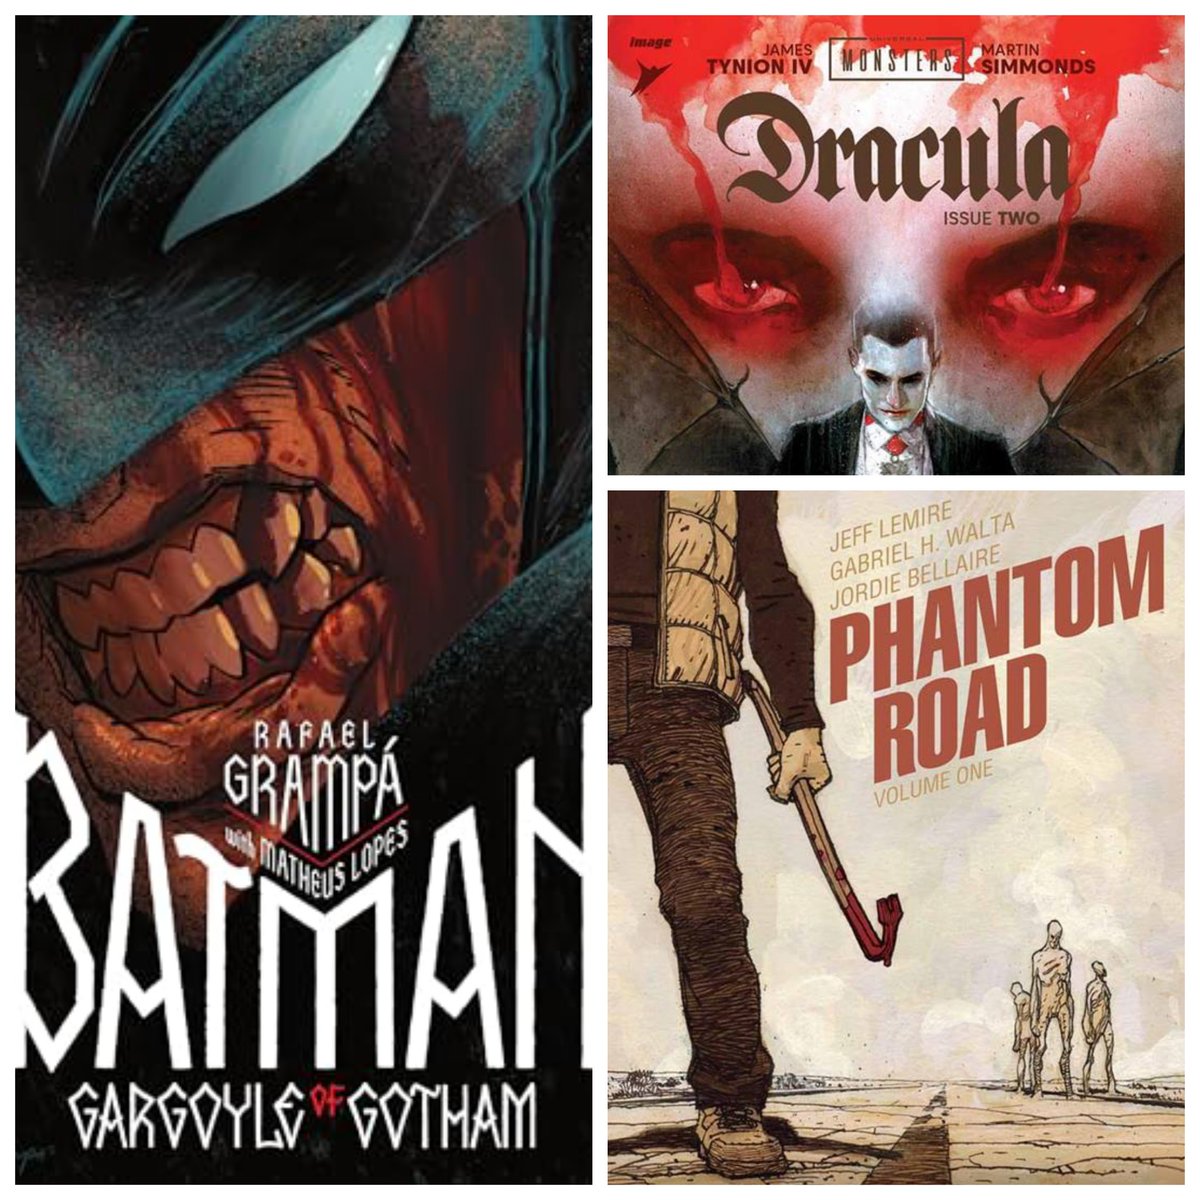 3 books I've read recently that knocked it out of the park: -Batman: Gargoyle of Gotham by Raphael Grampa -Dracula by @JamesTheFourth and @Martin_Simmonds -Phantom Road by Jeff Lemire and @ghwalta What are your over-the-top reading at the moment? Let's spread some love!